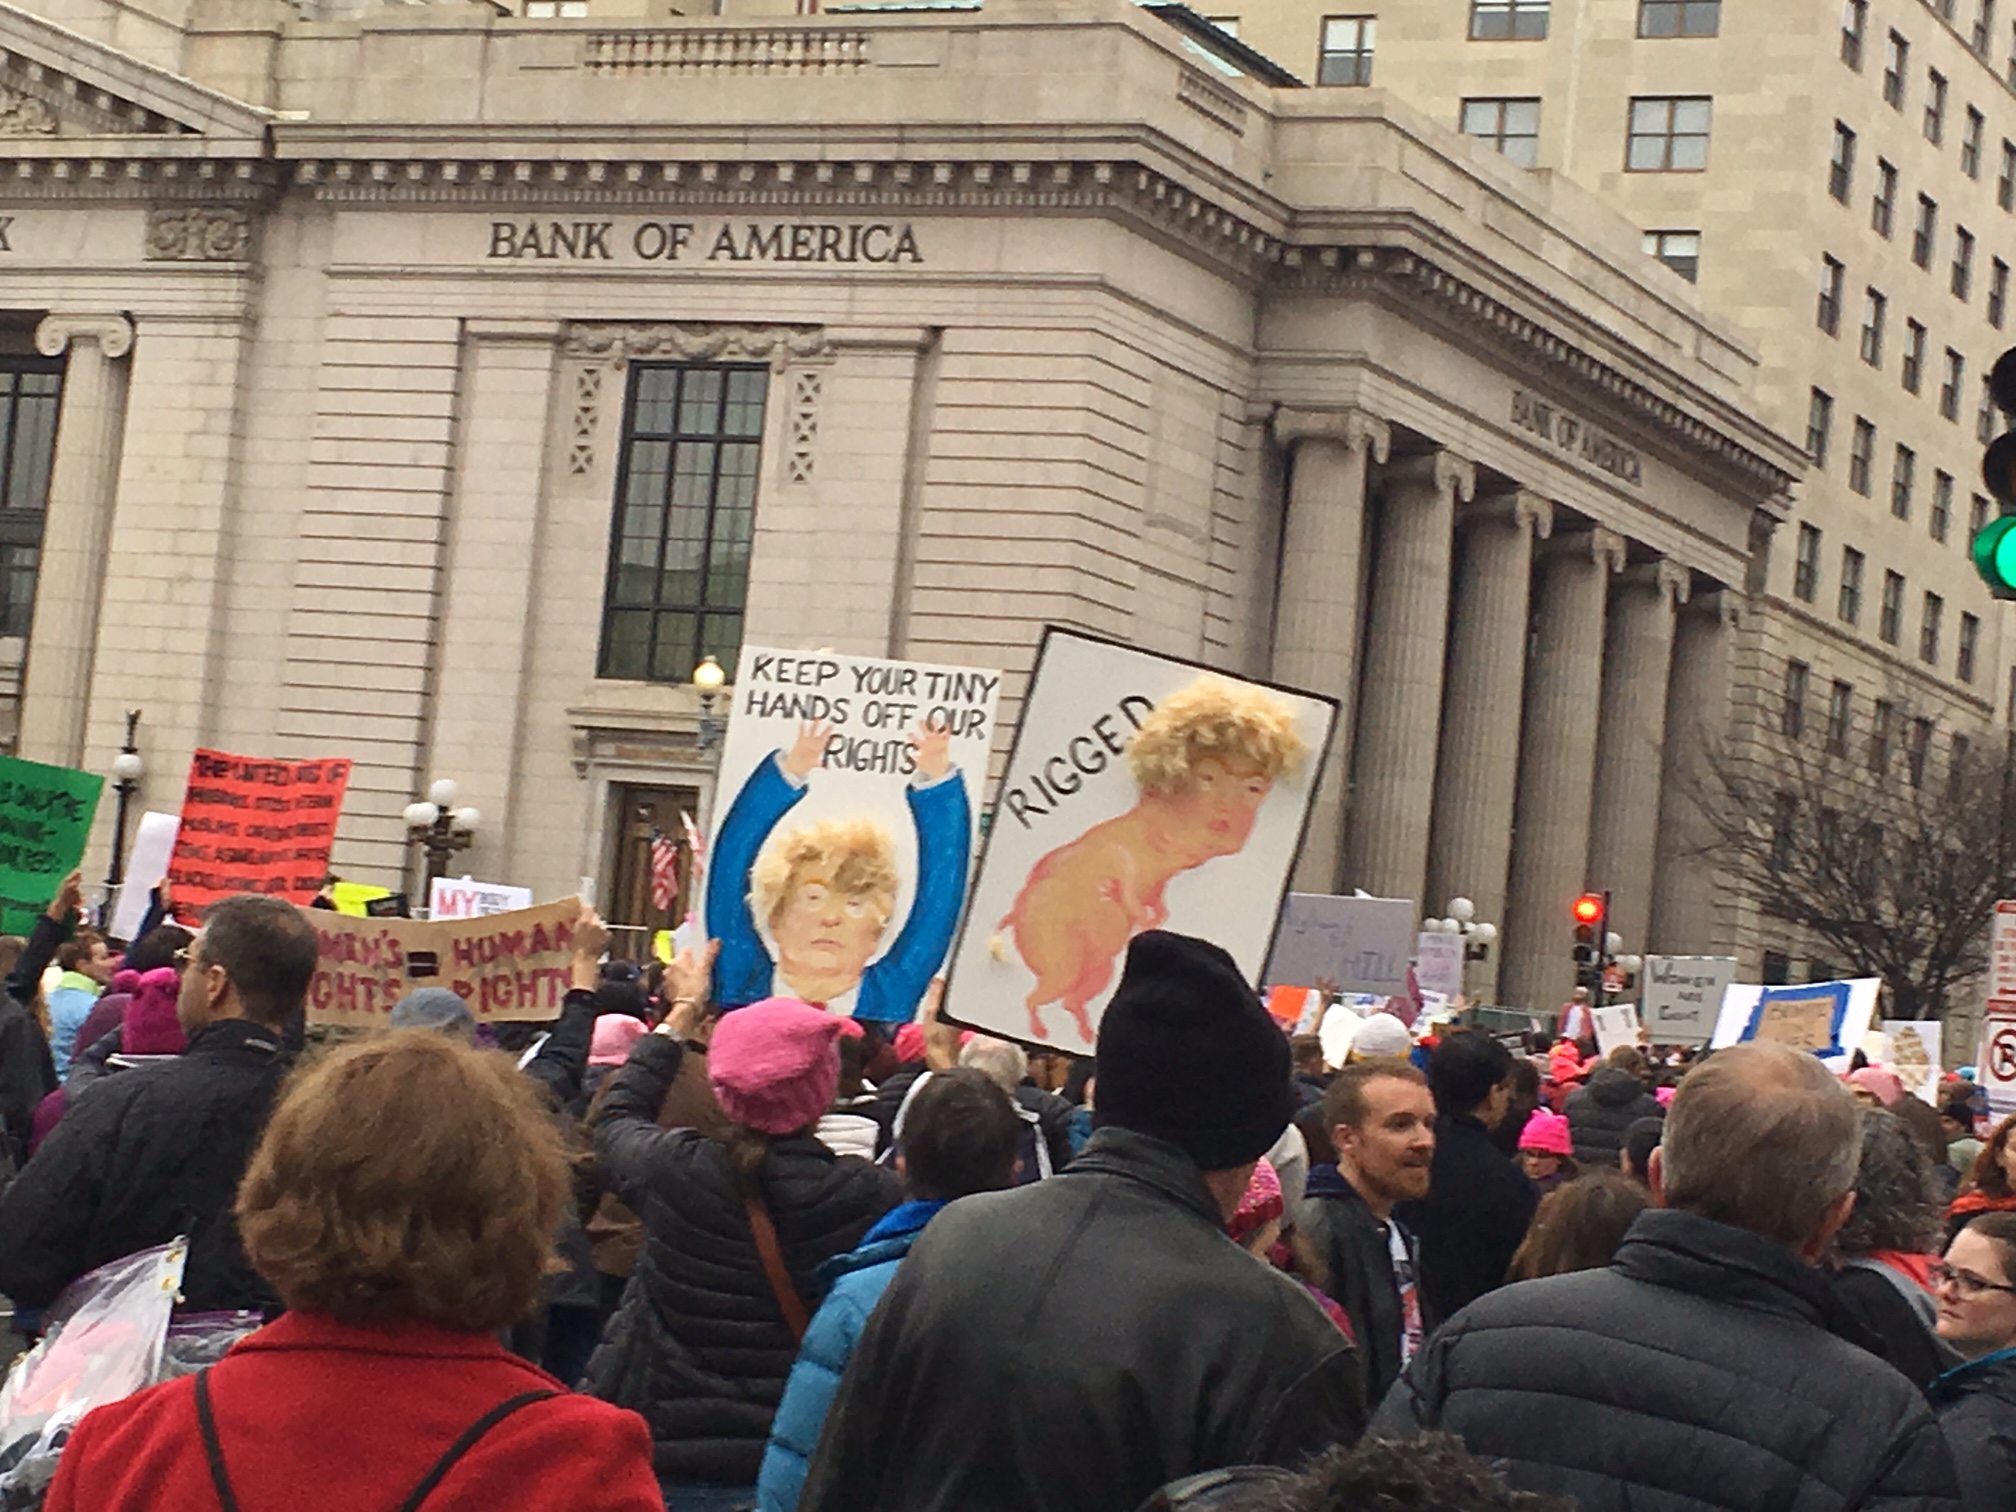 Election Day and Women’s March, visions and reports from Washington DC